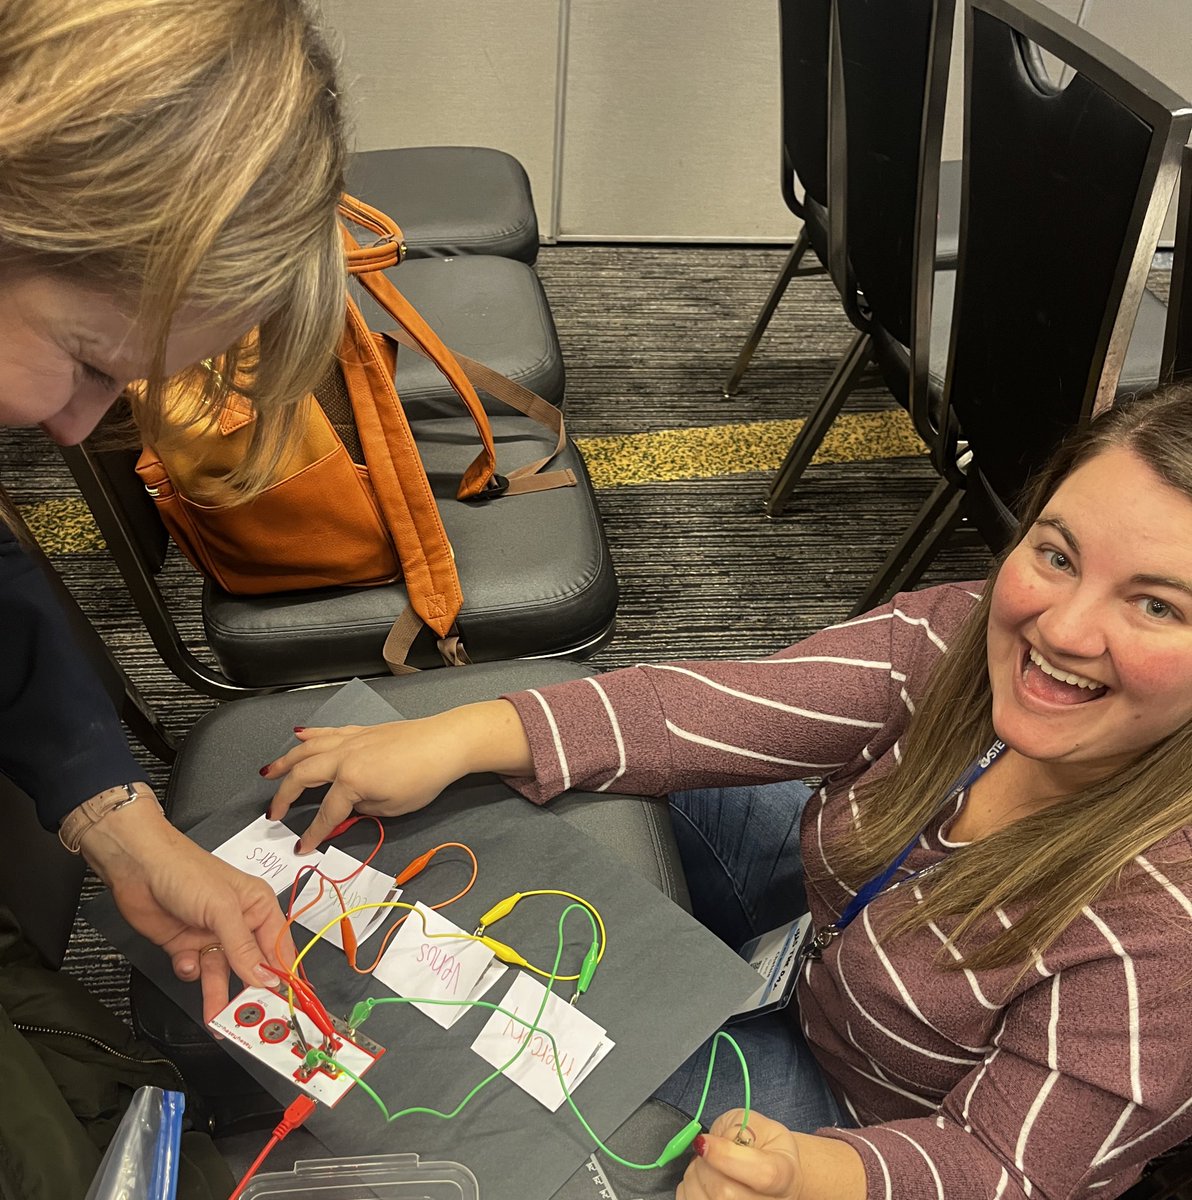 Learning so much, making connections, getting ideas, and planning at #VSTE22! #STEMLab